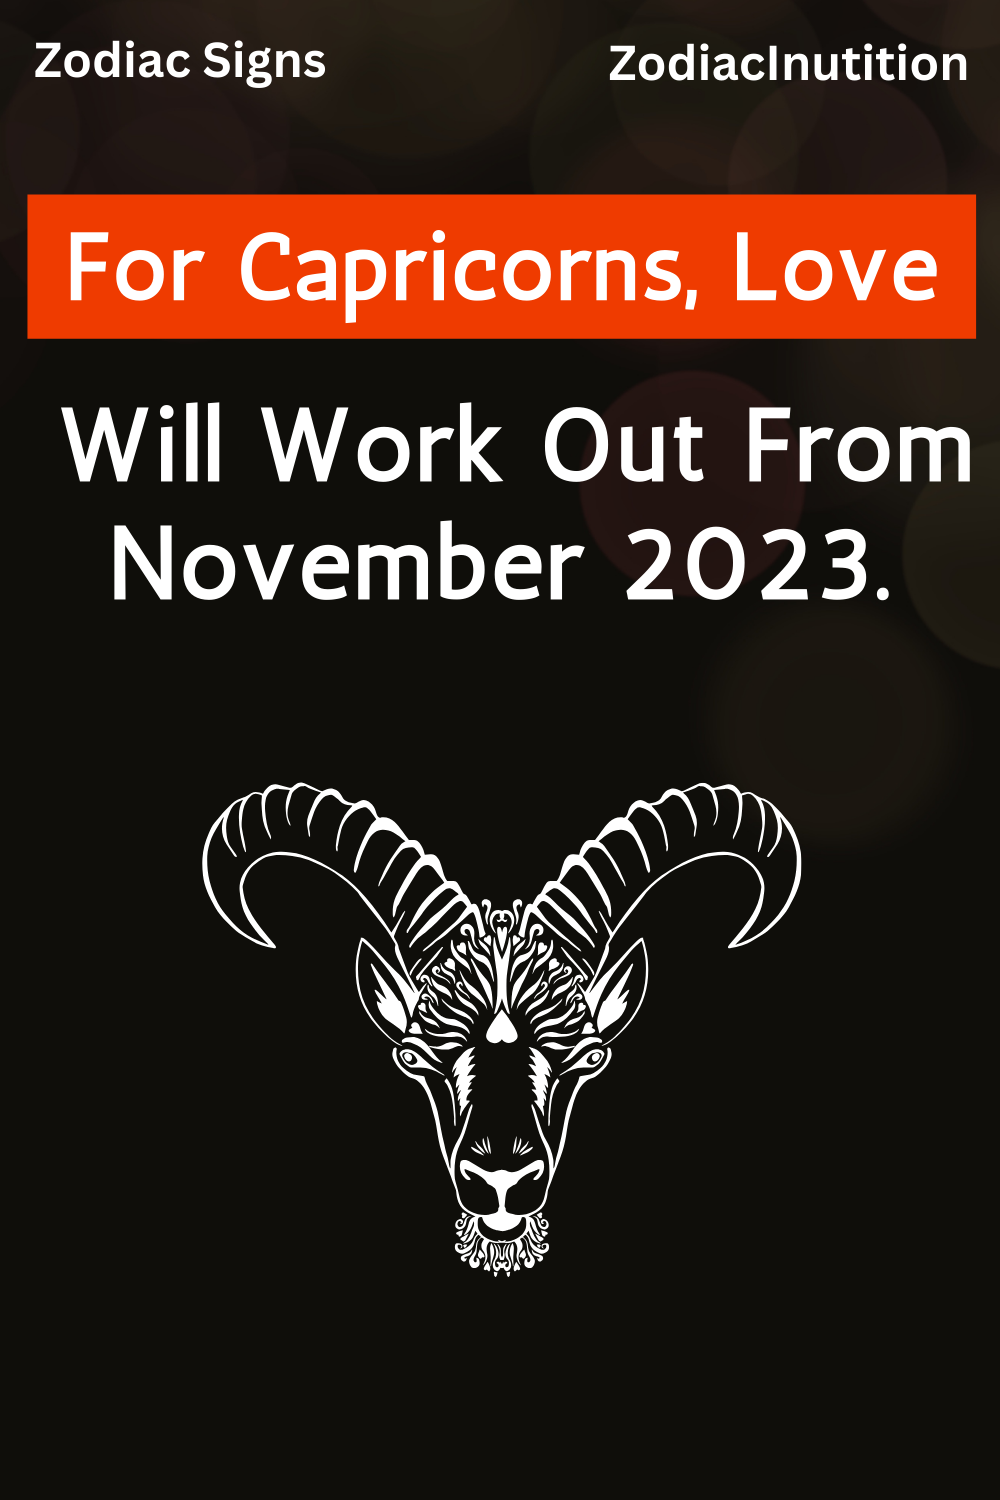 For Capricorns, Love Will Work Out From November 2023.